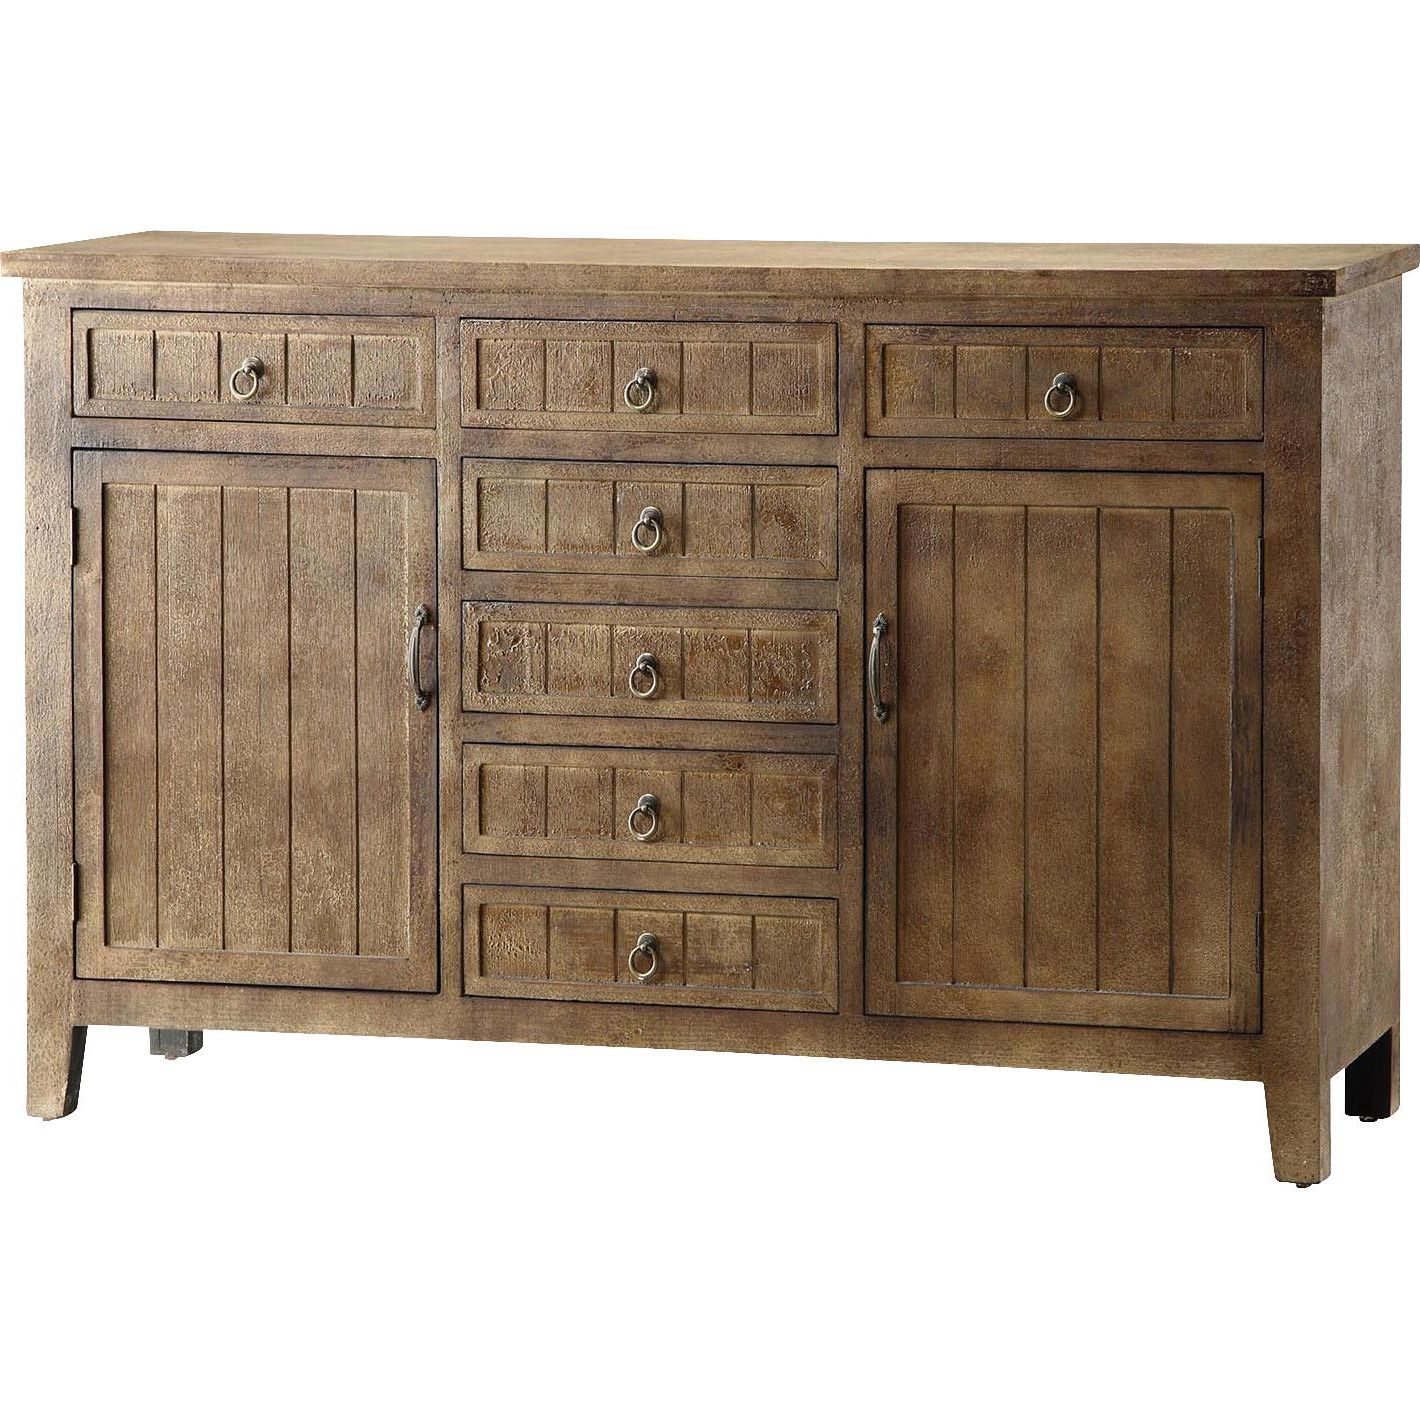 Crestview Collection Cheyenne Sideboard | Pollard Pertaining To Drummond 4 Drawer Sideboards (View 9 of 20)